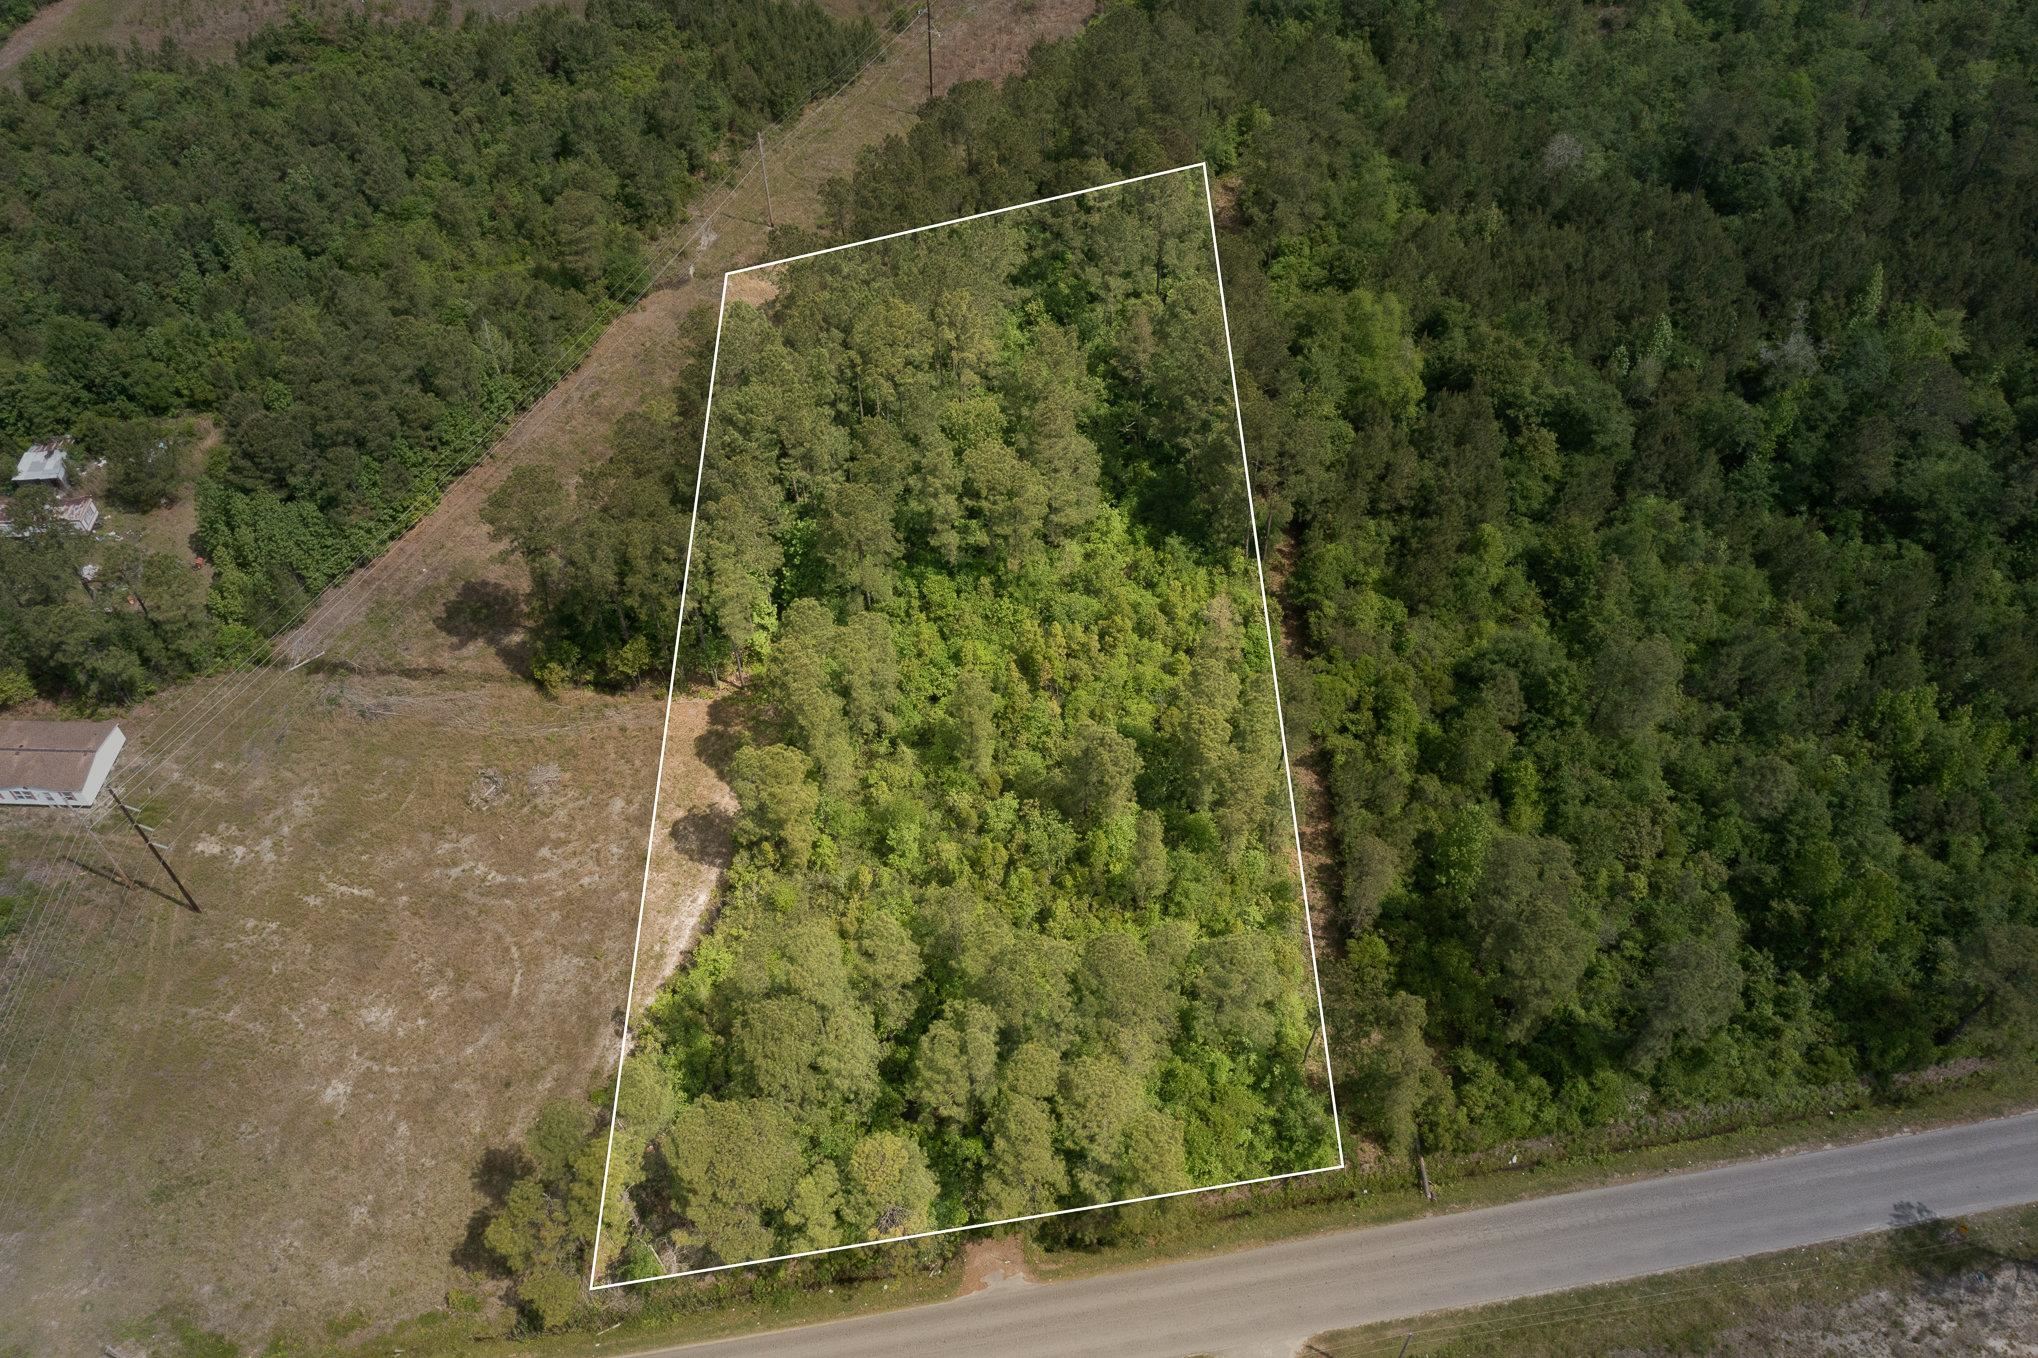 build your dream home on this beautiful wooded 2 acre lot.  minutes from downtown conway and a short drive to the ocean!  manufactured homes are also possible.  zoned fa.